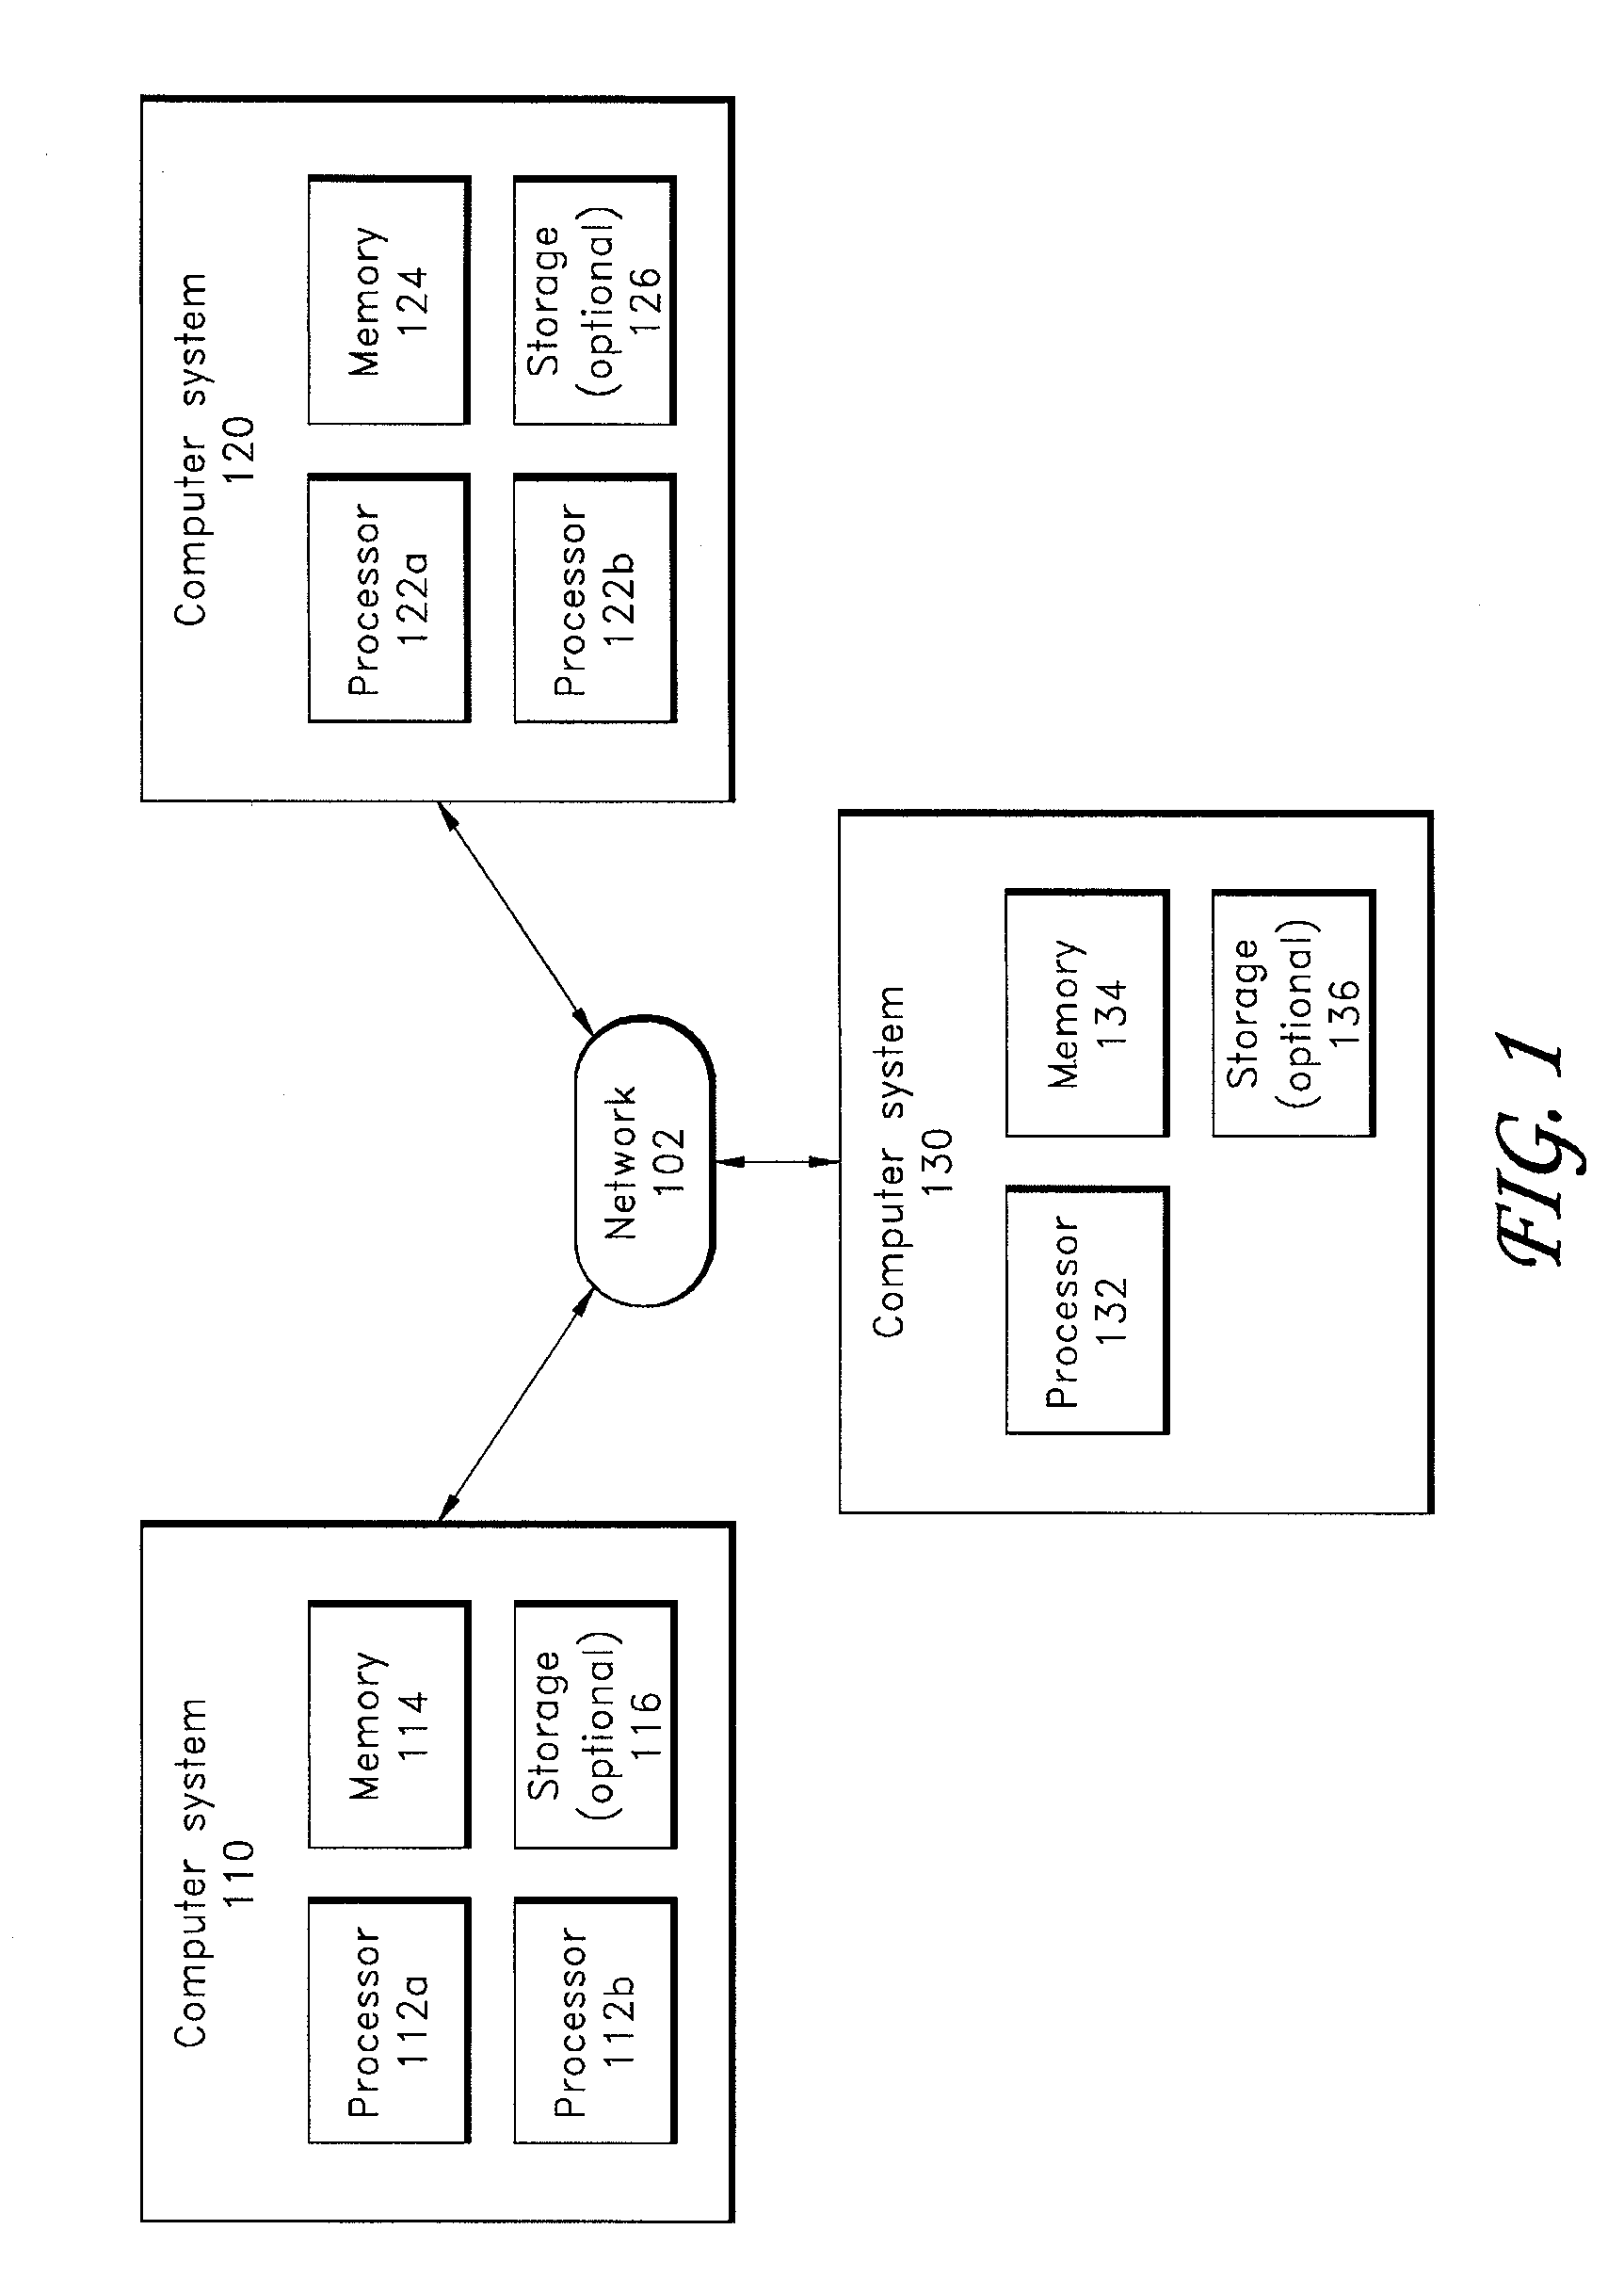 Cluster computing support for application programs